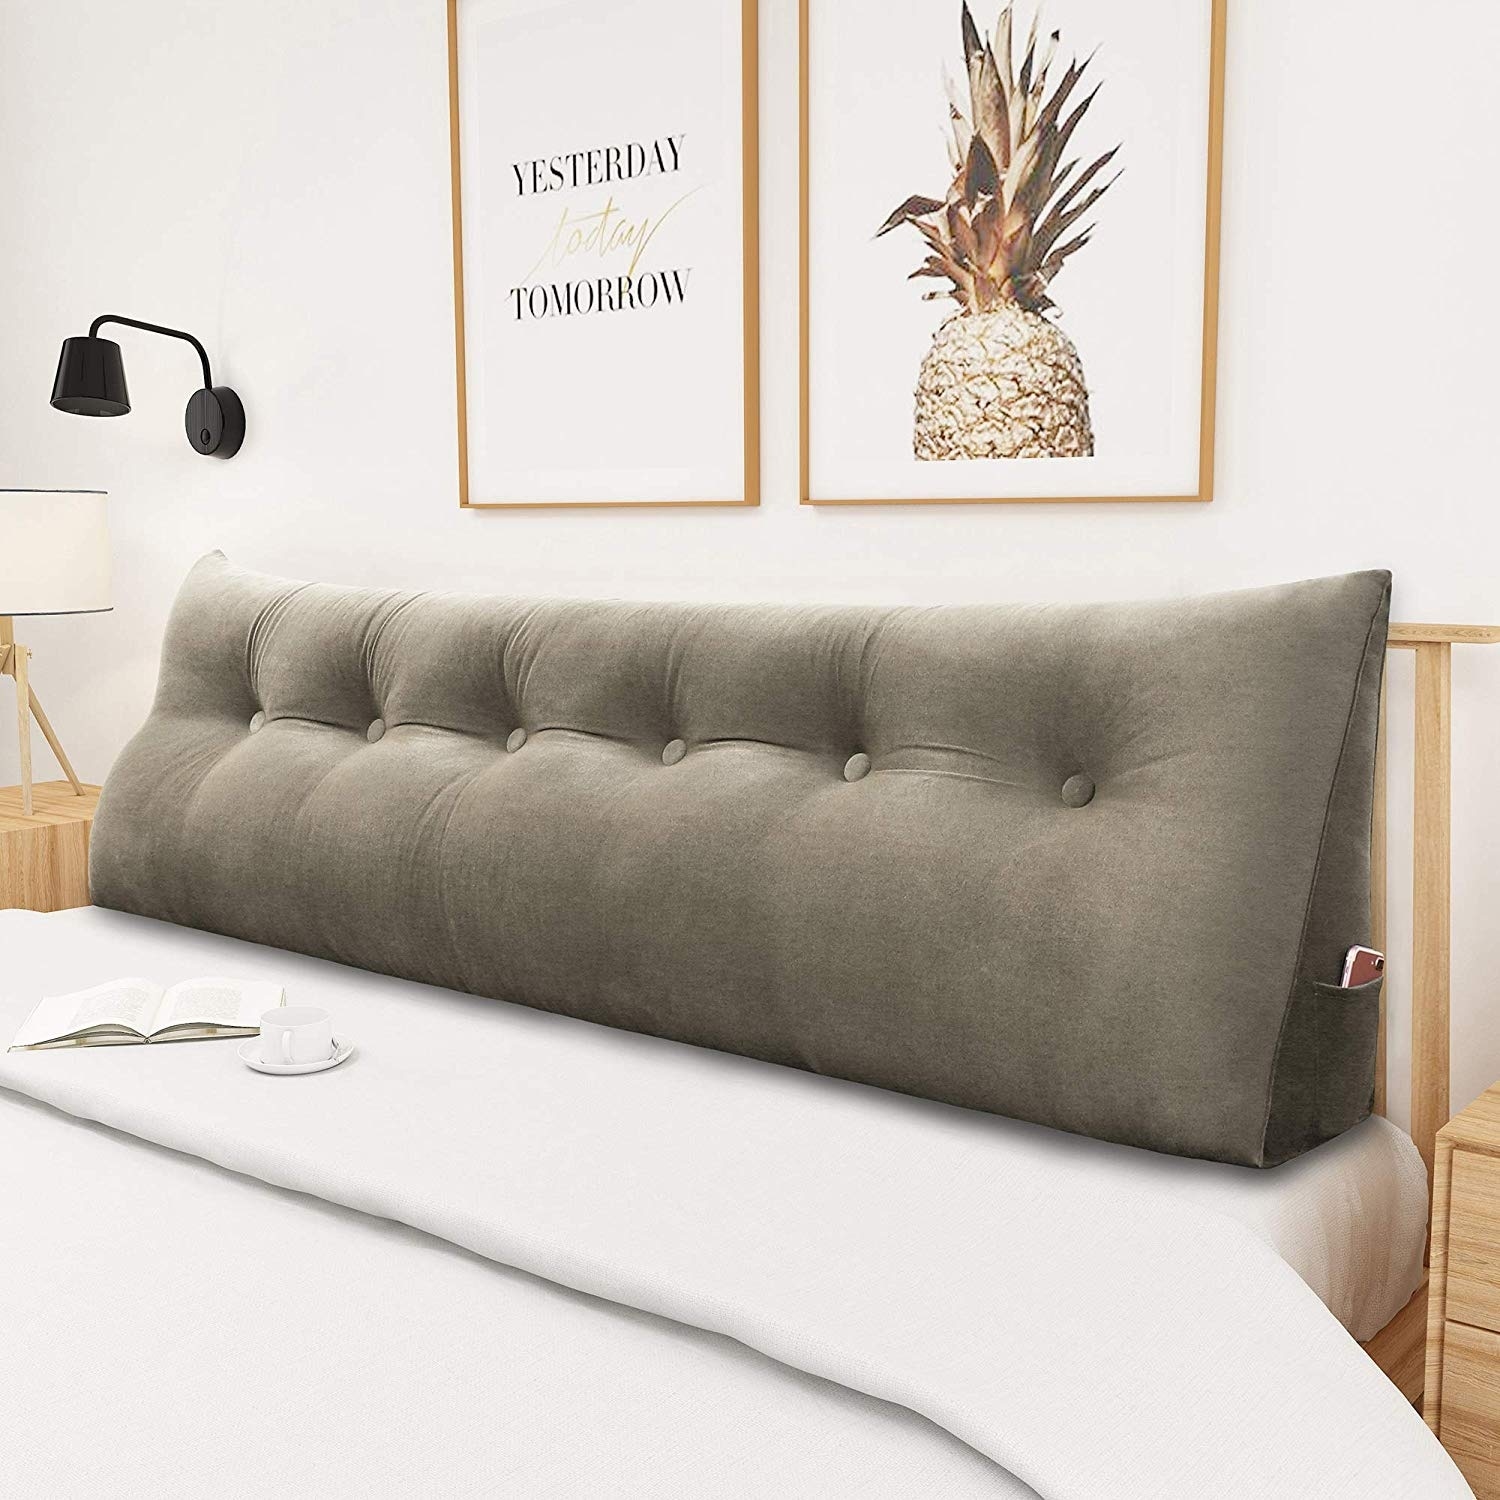 https://ak1.ostkcdn.com/images/products/is/images/direct/50757b9cae1e6d4536fee6255dd61367e05e2f41/WOWMAX-Bed-Rest-Wedge-Reading-Pillow-Gray-Velvet-Bolster-Back-Support.jpg